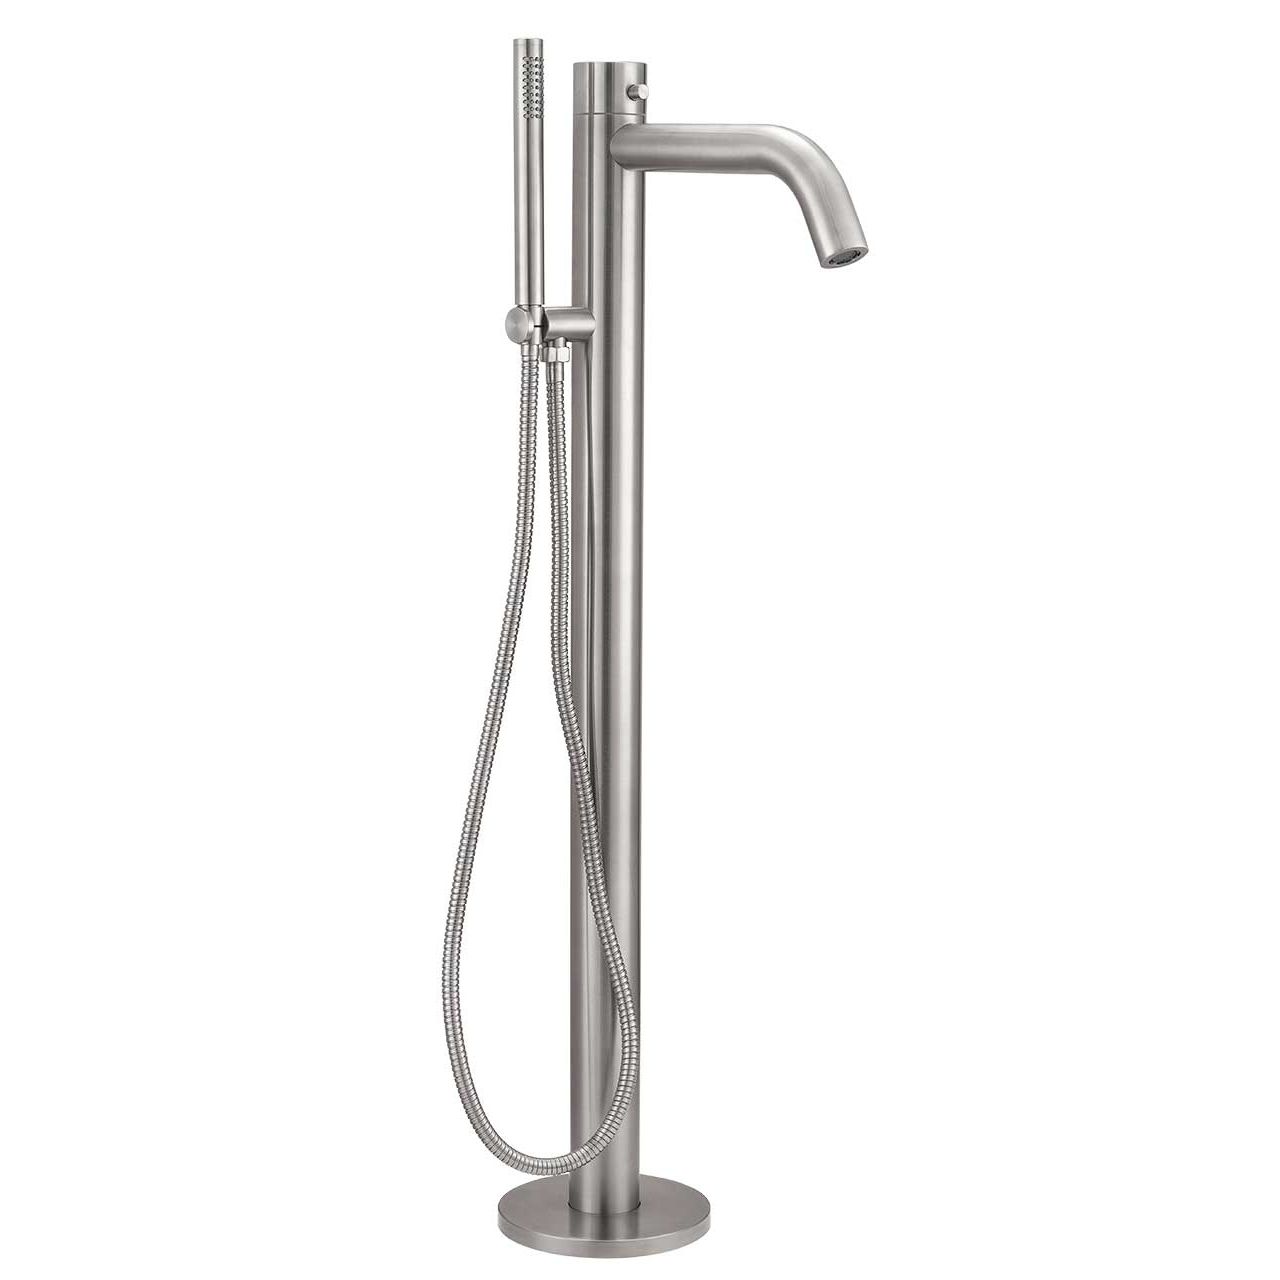 External tub stand with hand shower